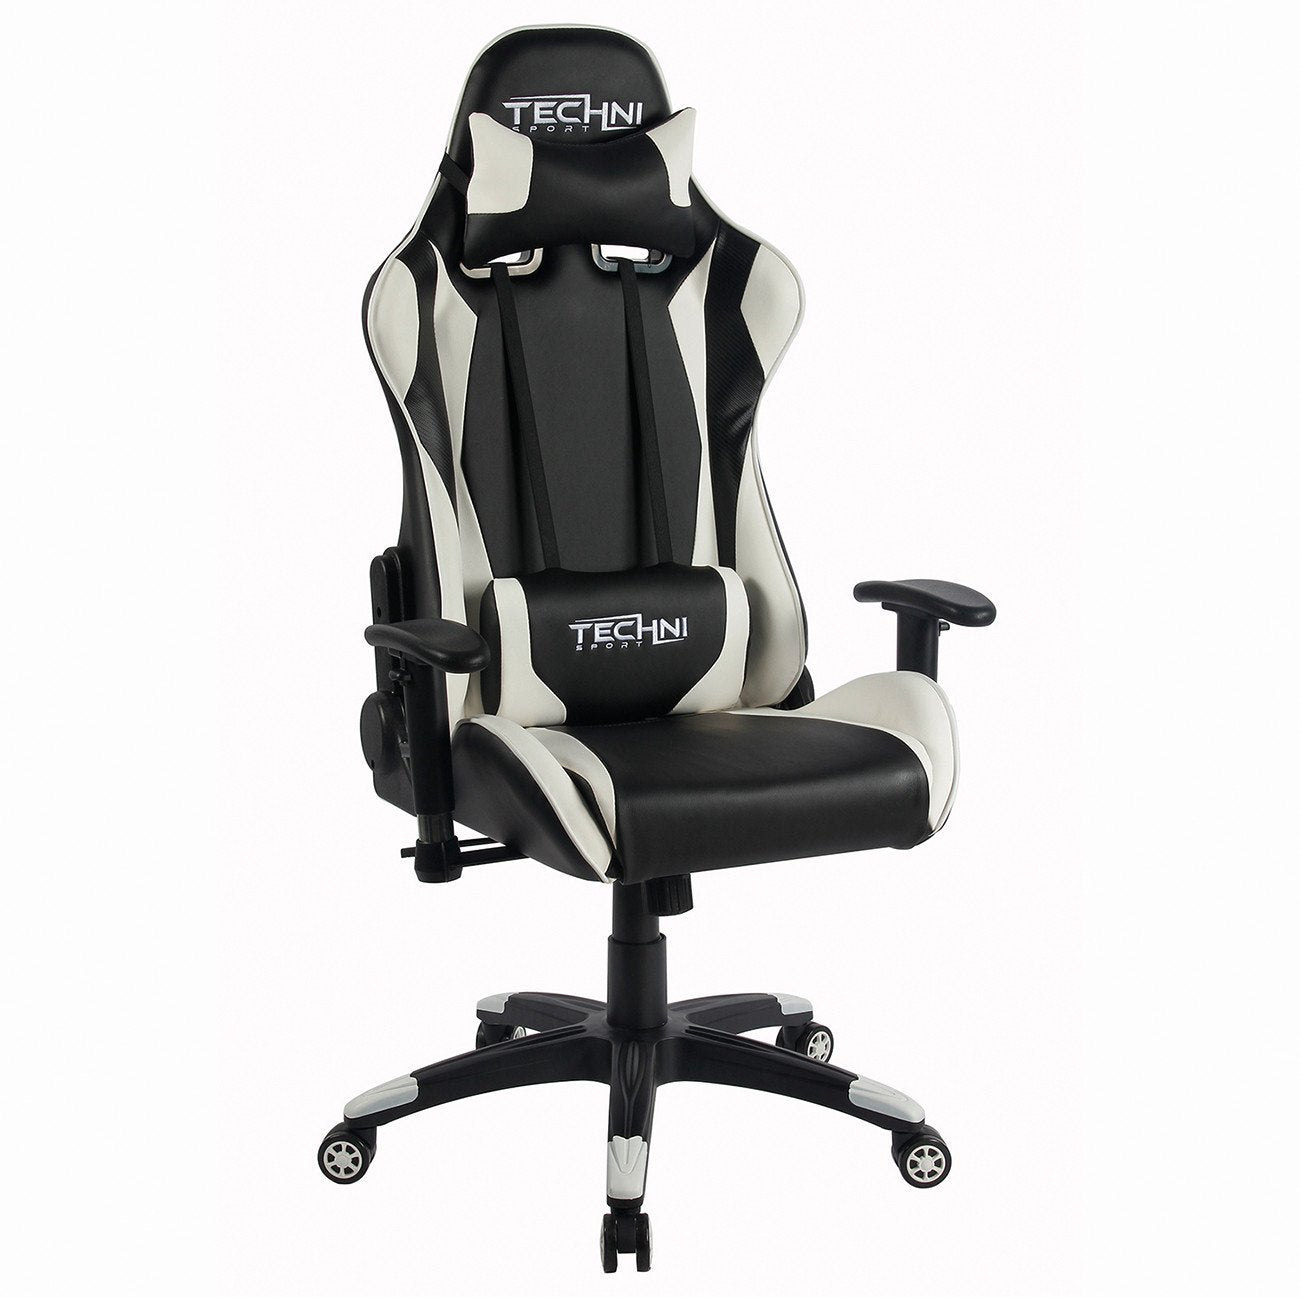 Techni Sport Rta-ts46-wht Office-pc Gaming Chair. Color: White